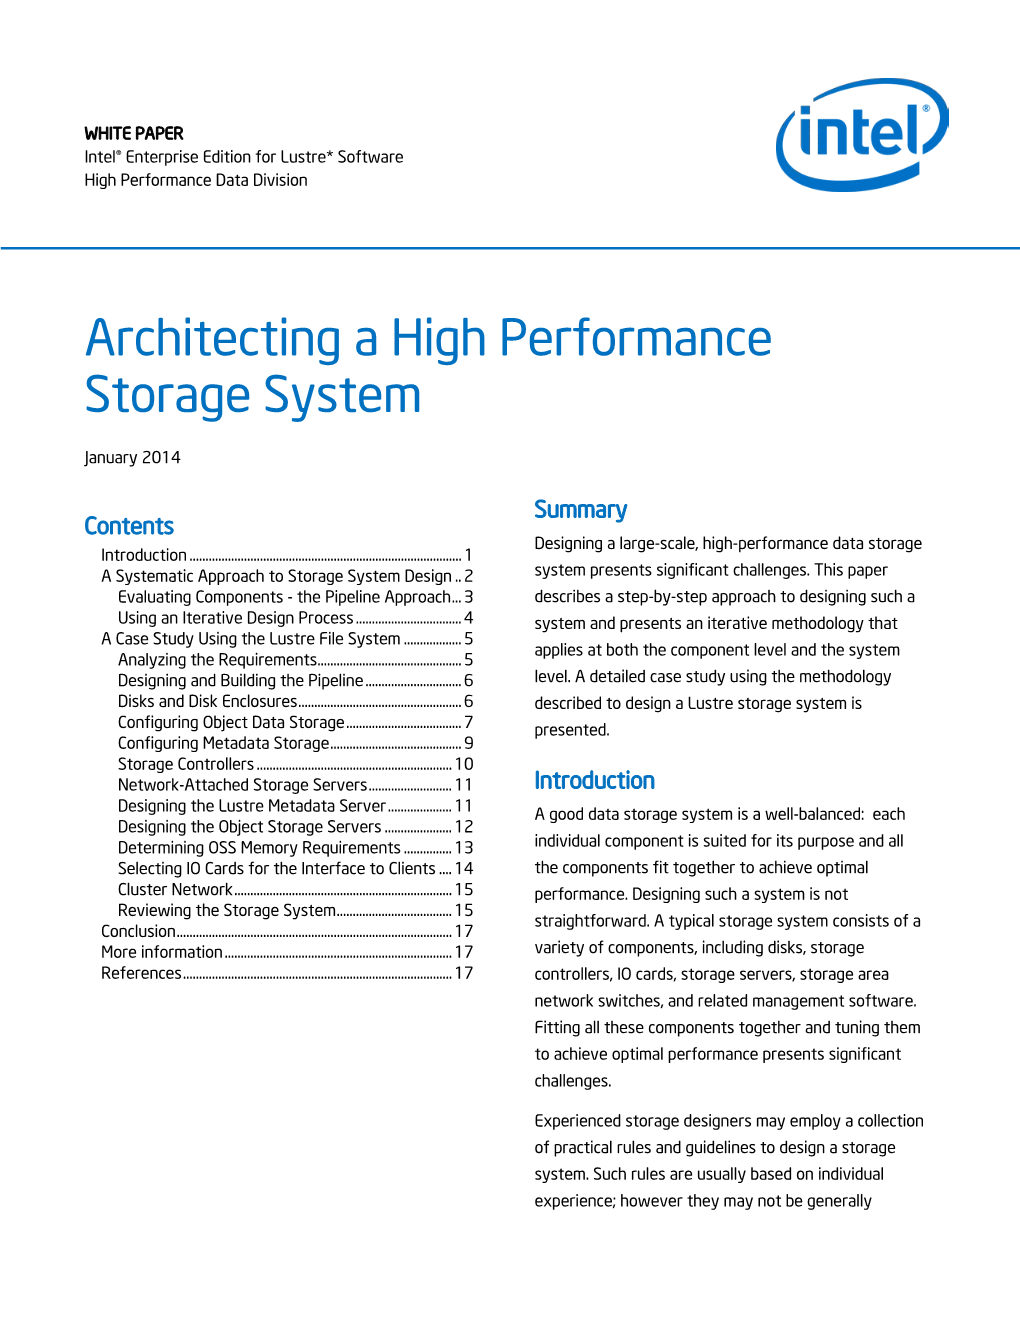 Architecting a High Performance Storage System